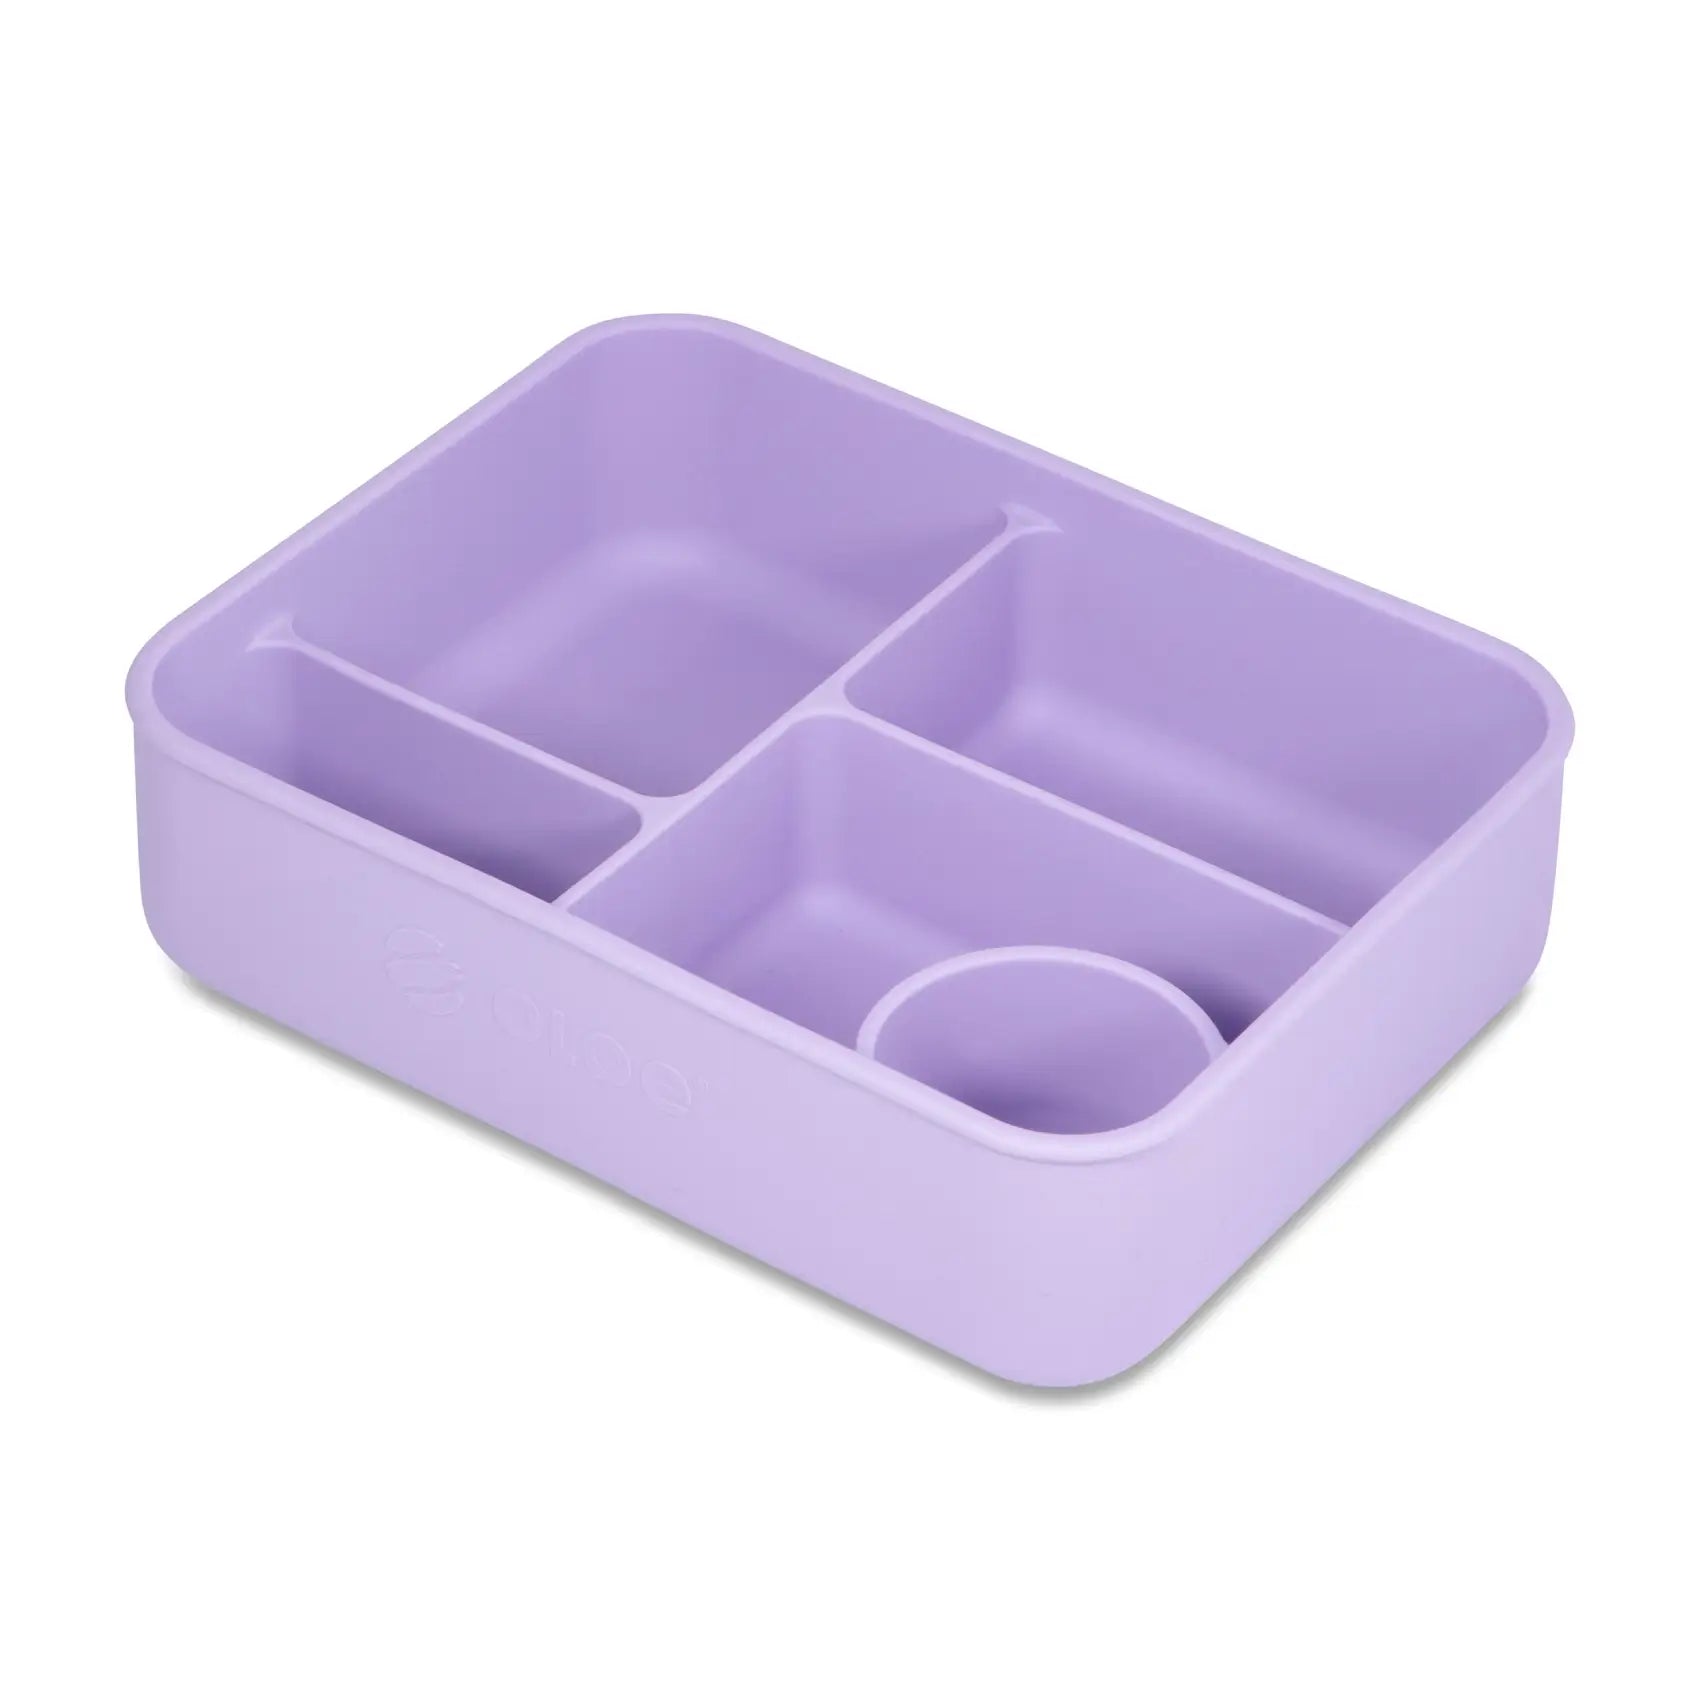 oloe-character-silicone-lunchbox-purple-inside-showing-compartments